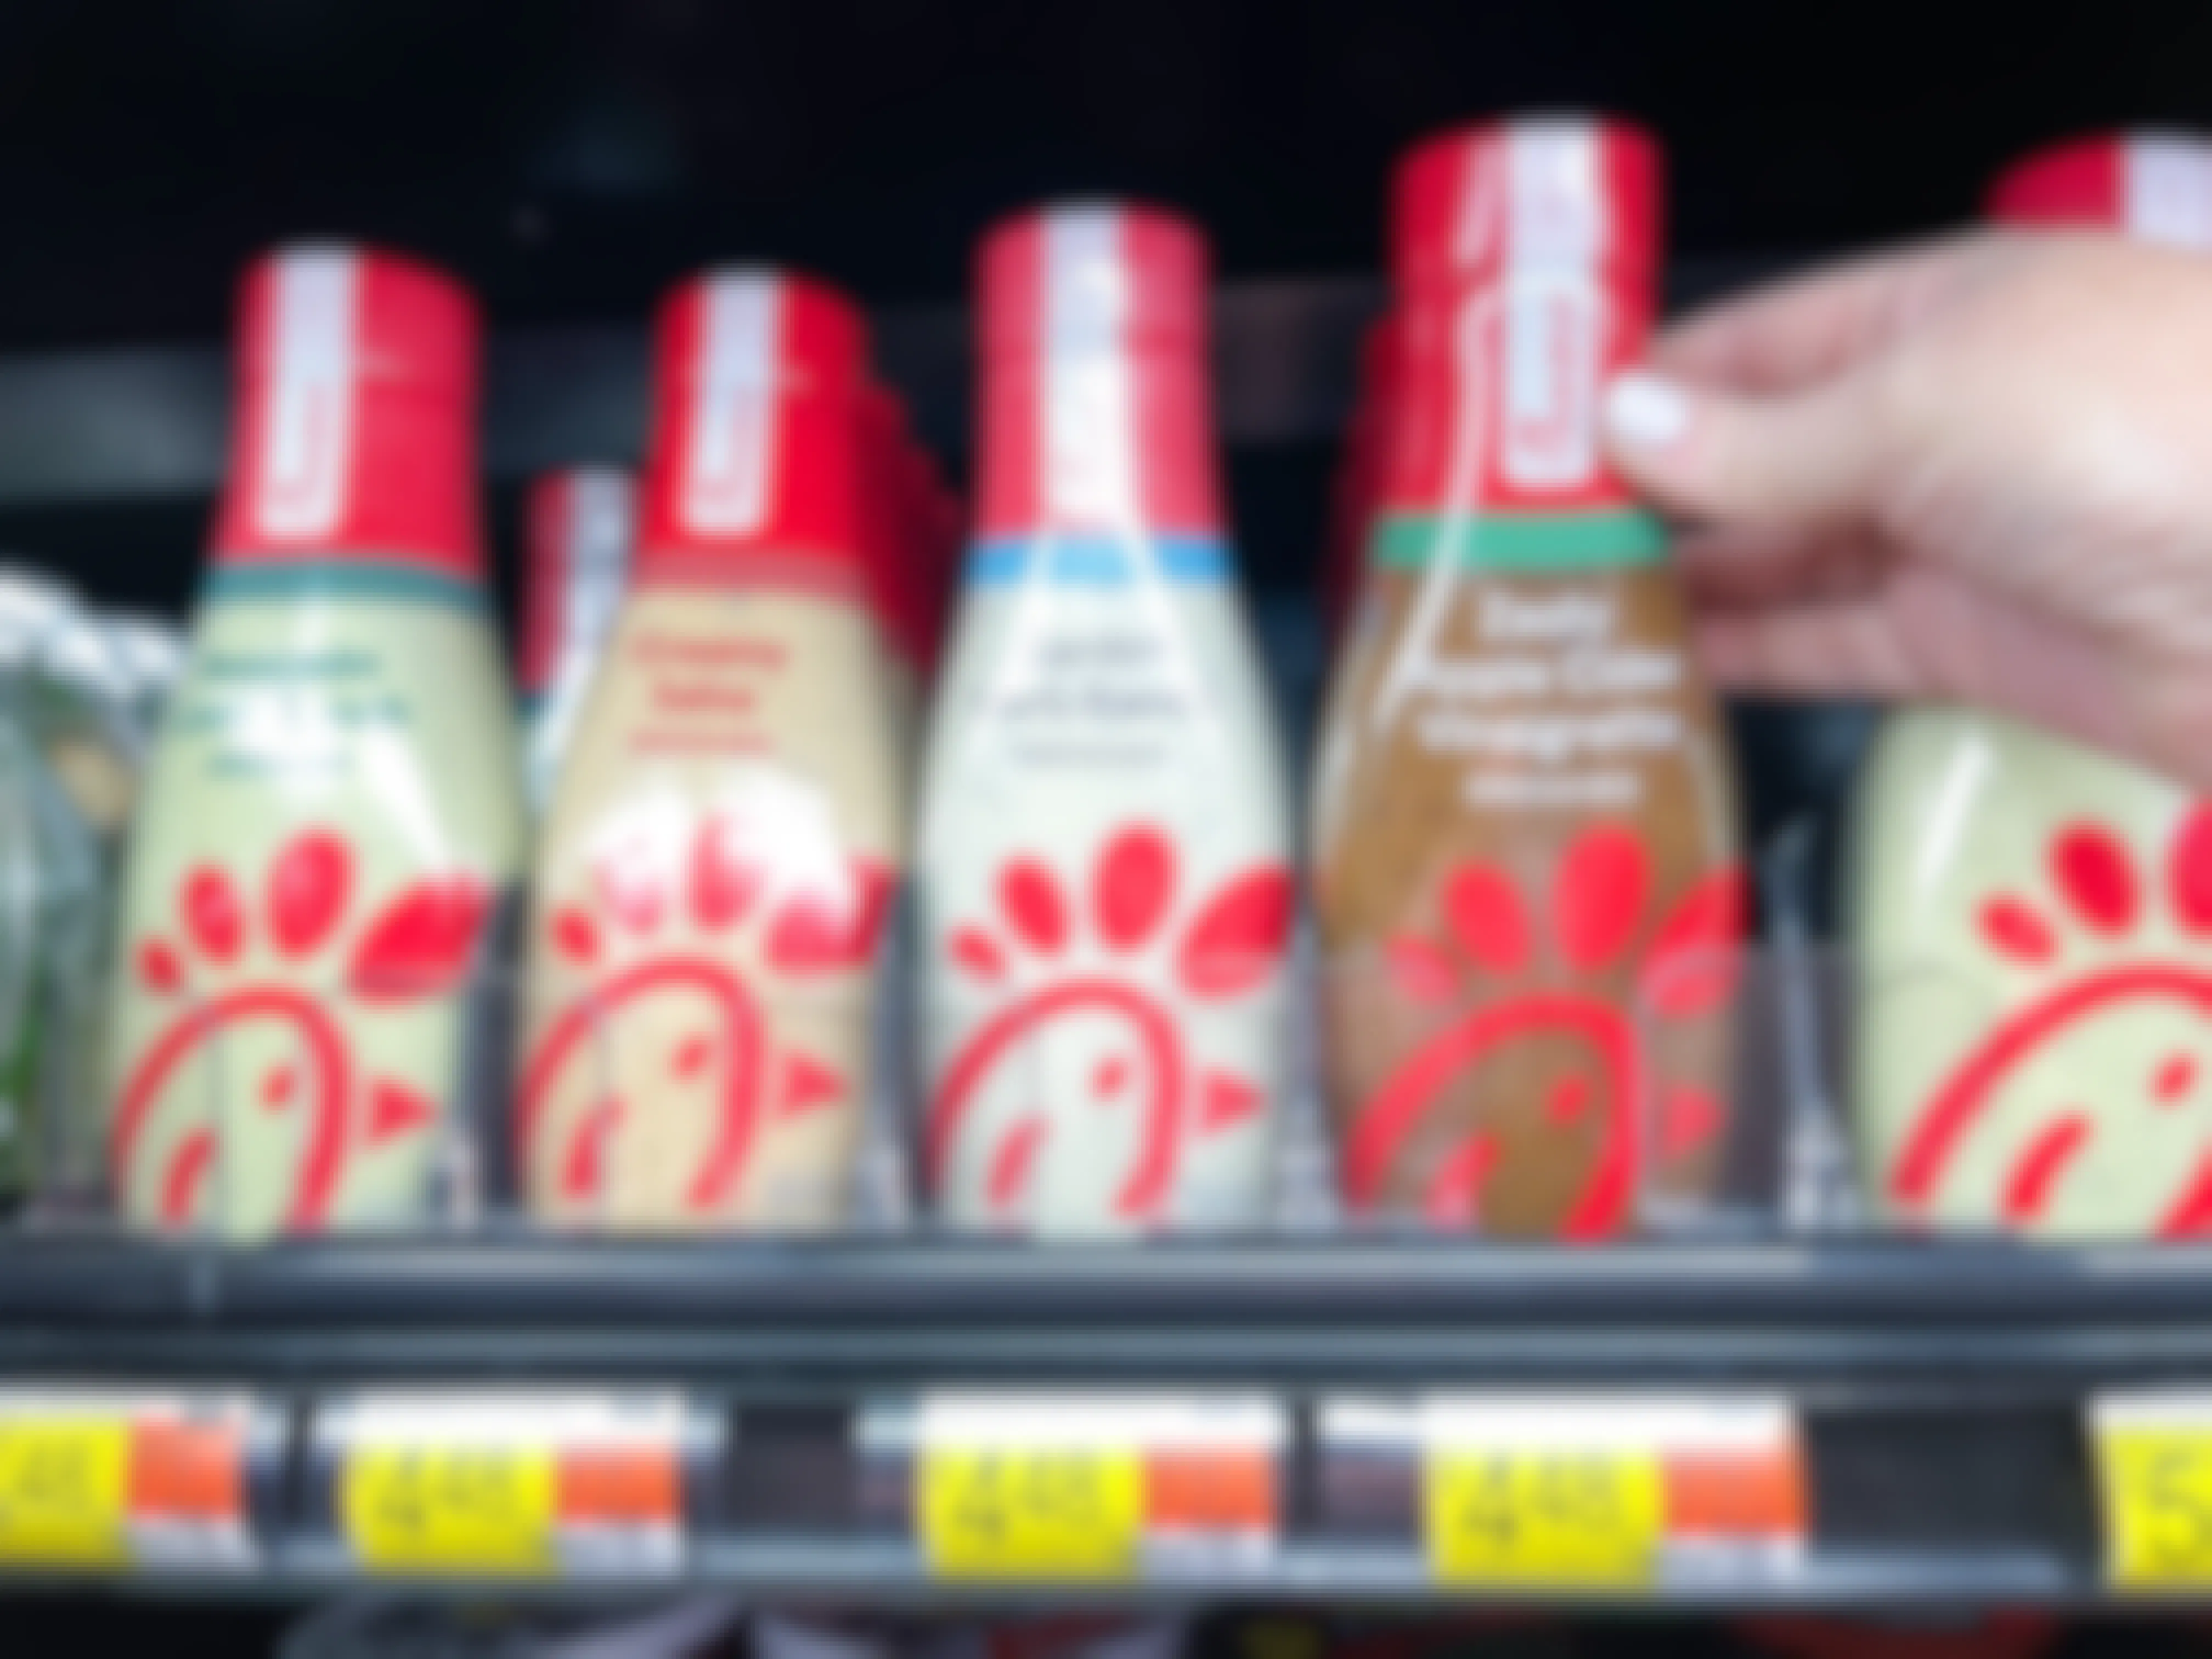 Chick-fil-A Salad Dressings Have Hit Grocery Store Shelves